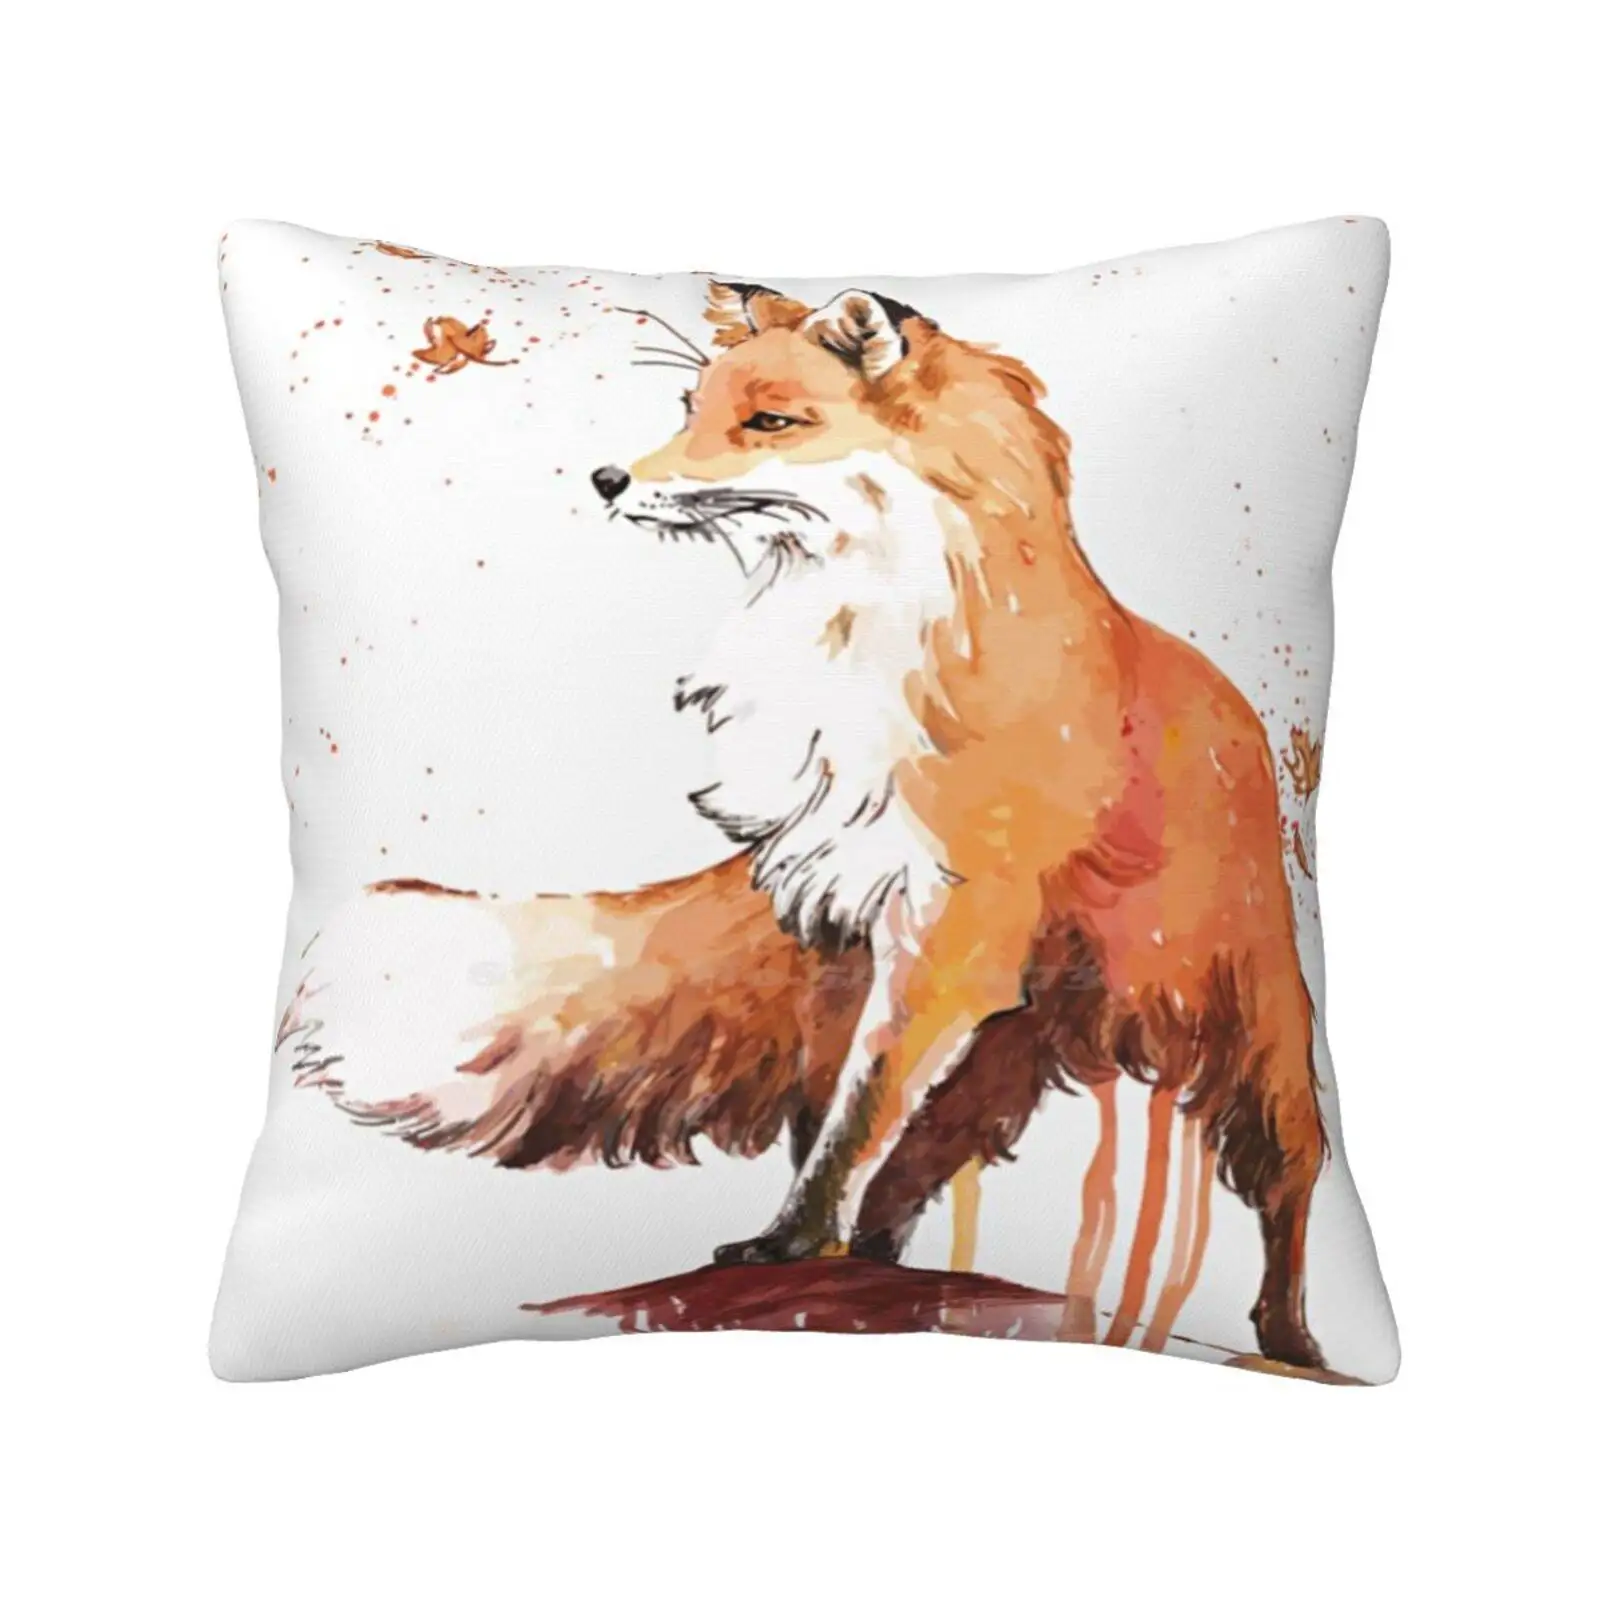 

Beautiful Fox Throw Cushion Pillow Cover Foxes Art Forest Animals Autumn Watercolor Splash Colors Cute Falling Leaves Beautiful